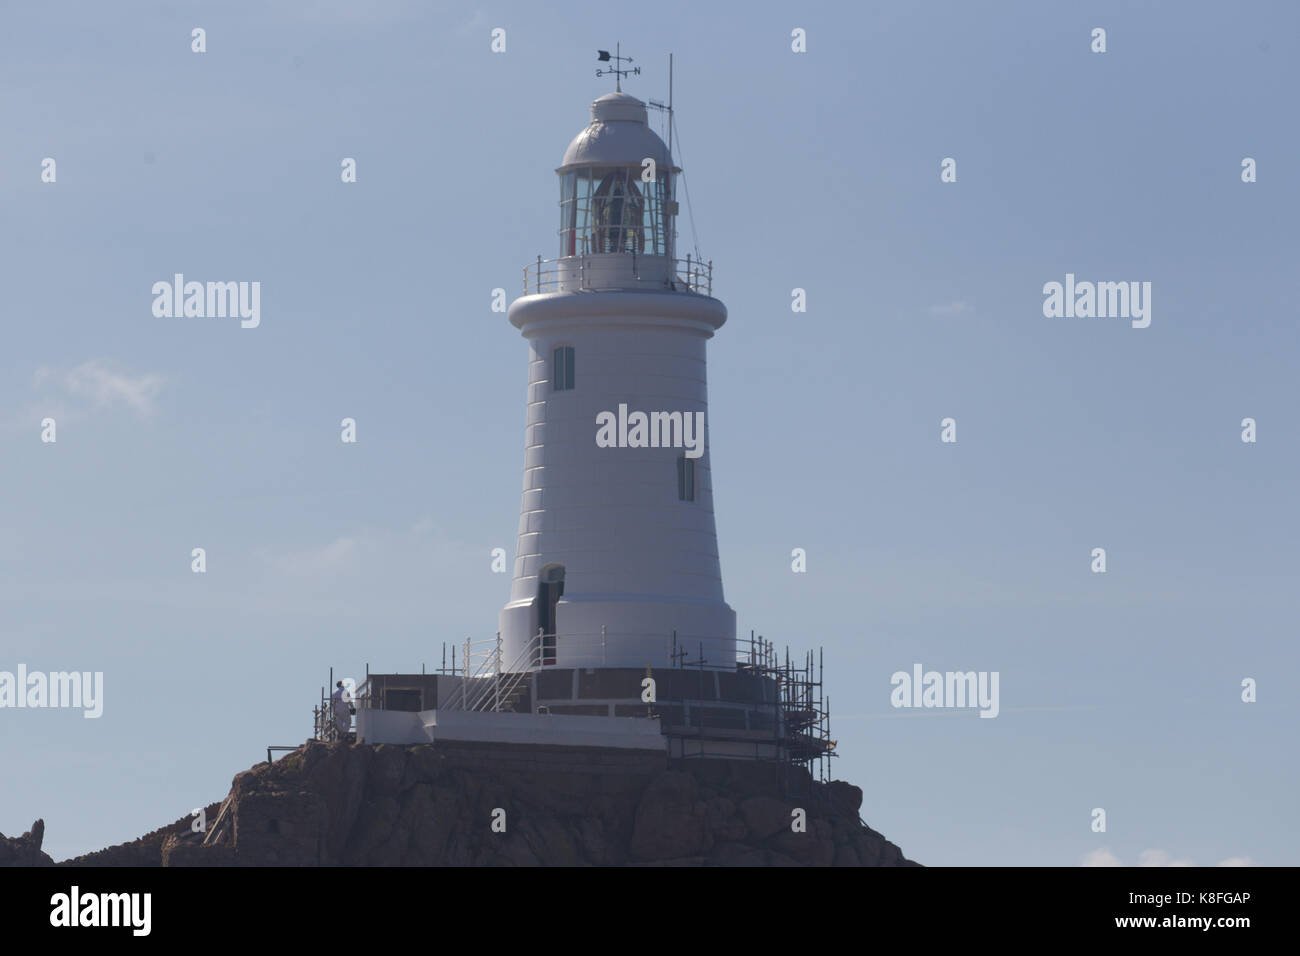 .Cordiere Lighthouse.Jersey 19th September 2017 Channel Islands .For 5 months the lighthouse (135ft tall) has been covered in scaffolding while Jersey Infrastructure staff(painters) burnt of the old paint & sandblasted before repainting it with a fresh new coat. The painters now hope to finish in the next two weeks, weather permiting Credit: Gordon Shoosmith/Alamy Live News Stock Photo